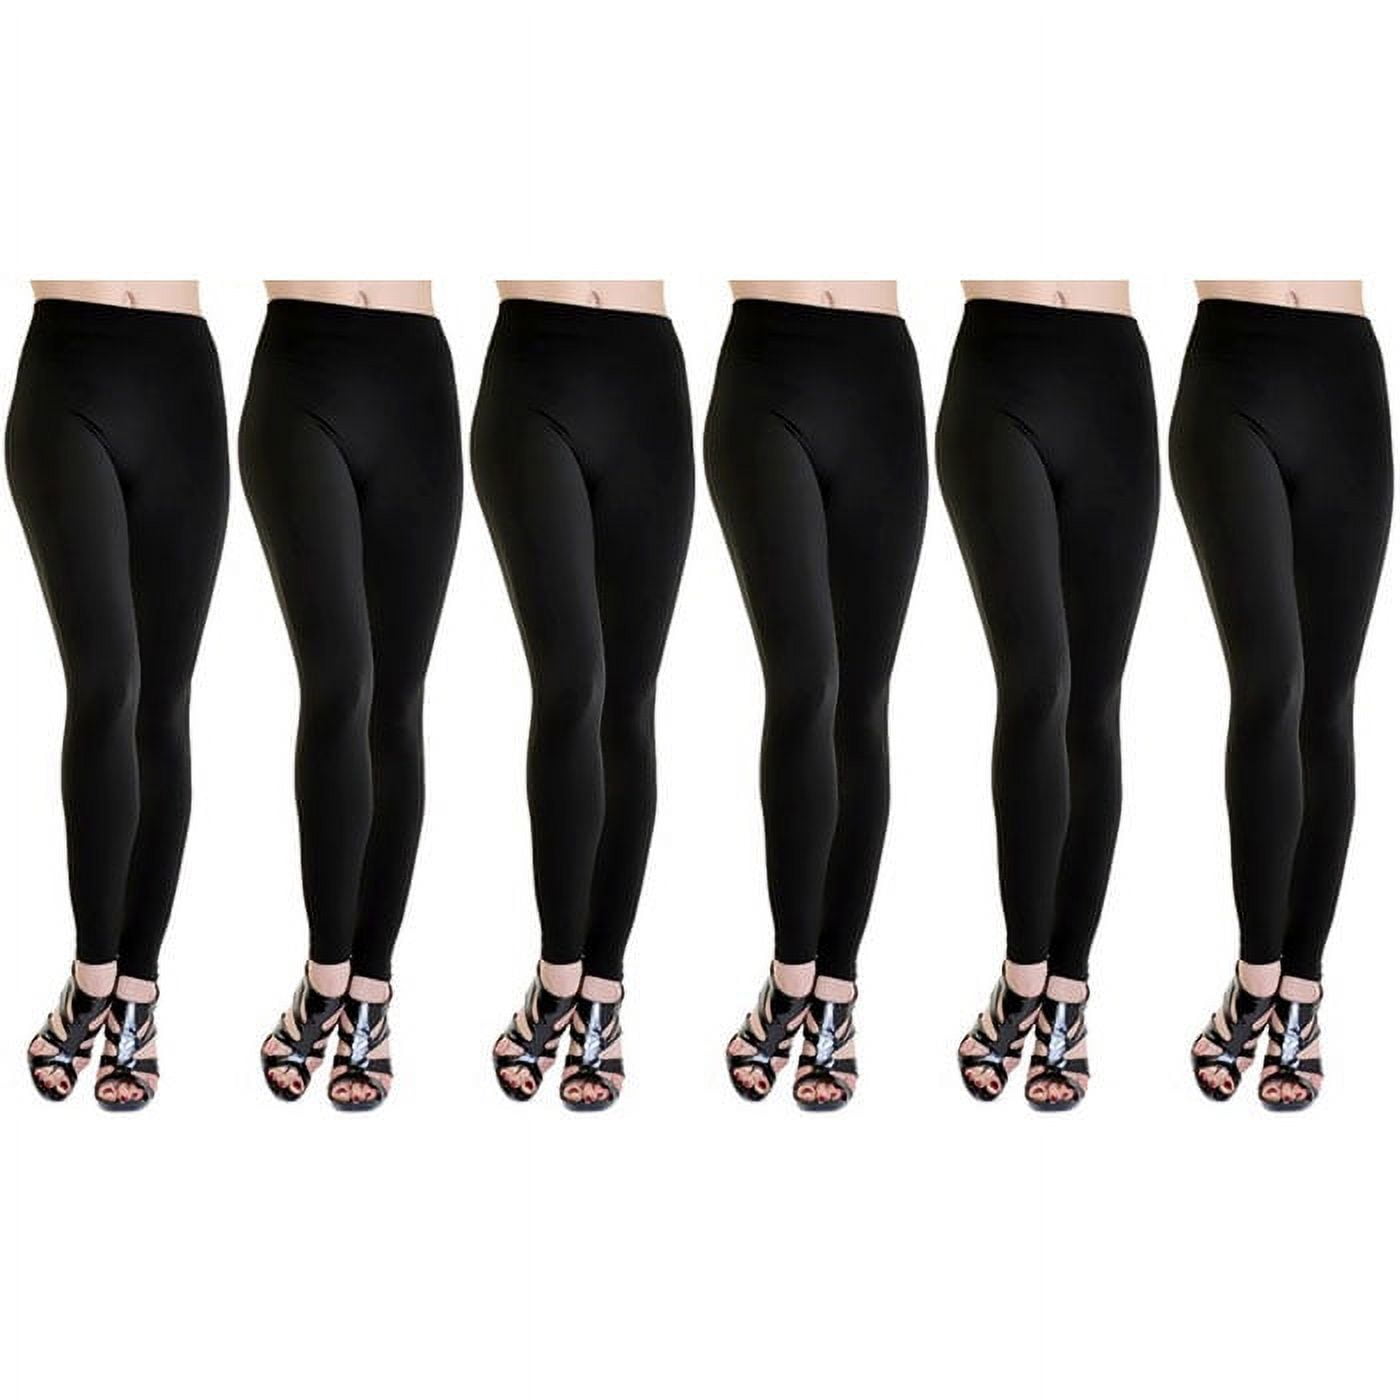 Premium Seamless Fleece Lined Leggings (6 Pack) - One Size Fits Most 0-14 -  Highwaisted - 92% Polyester / 8% Spandex, 7315595